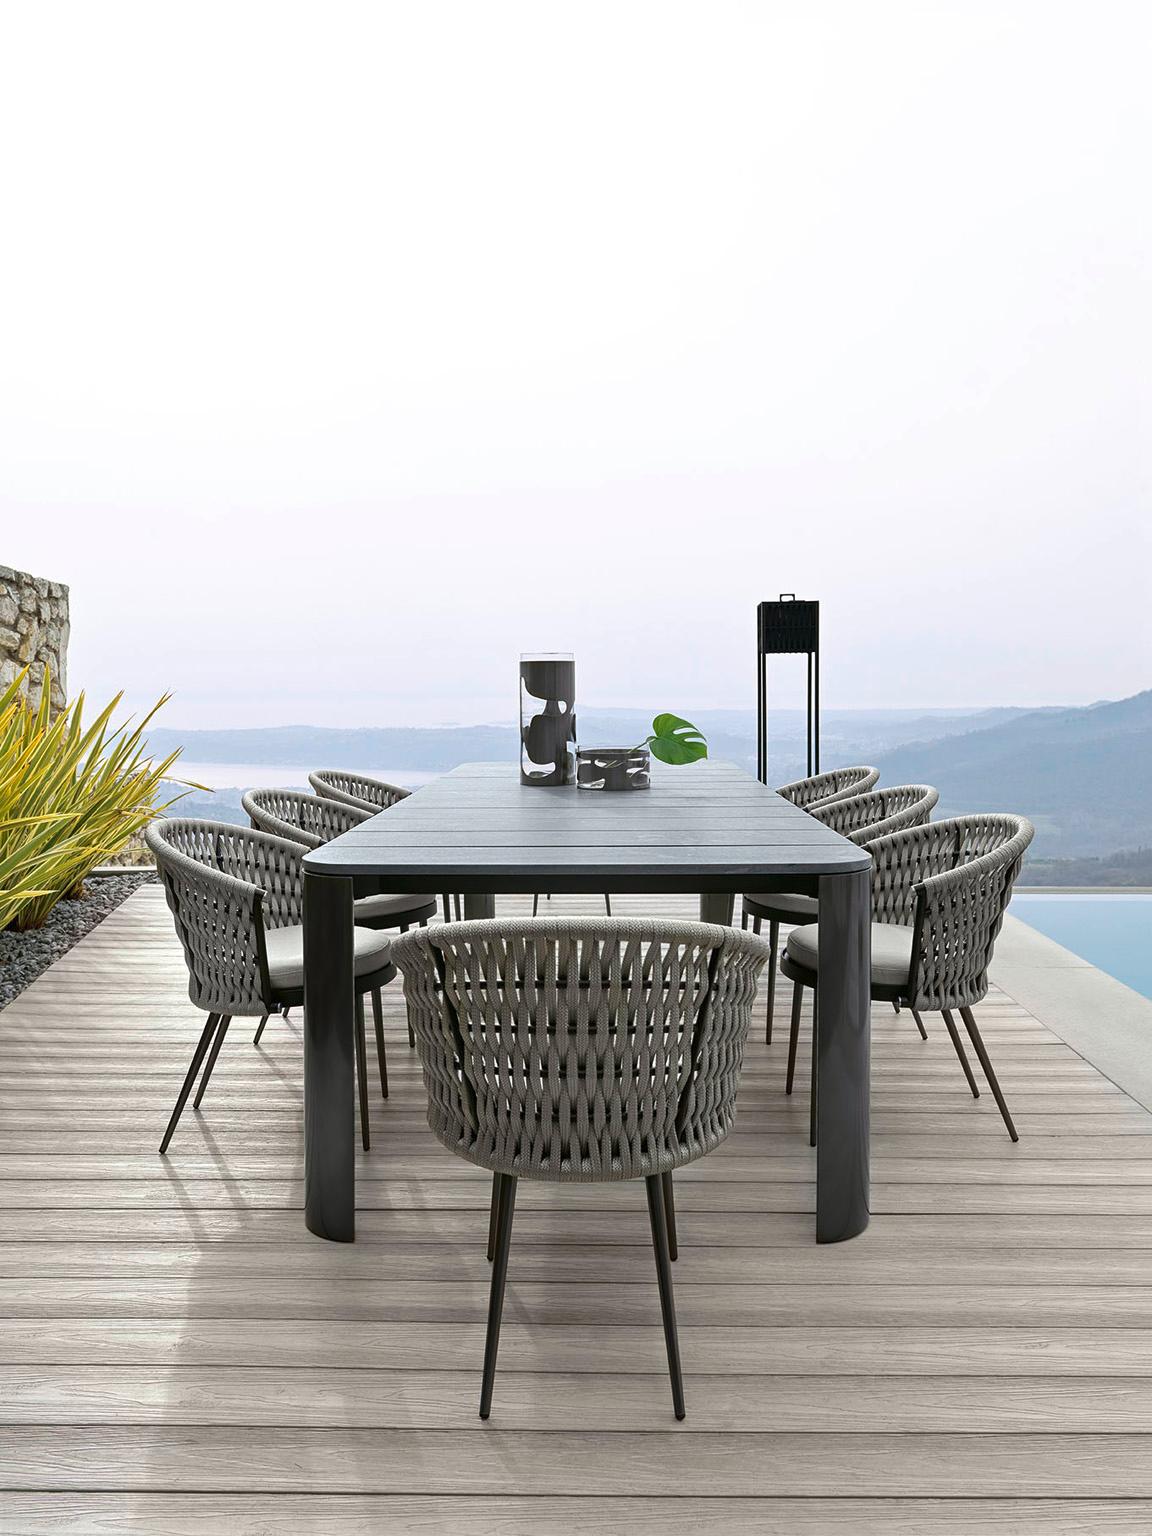 Giorgio Collection Dune Outdoor occasional chair in special treated fabric.
Cushion filling in waterproof dacron. Structure in combination of satined black metal treated in cataphoresis with inserted Giorgio Collection logo and light grey woven